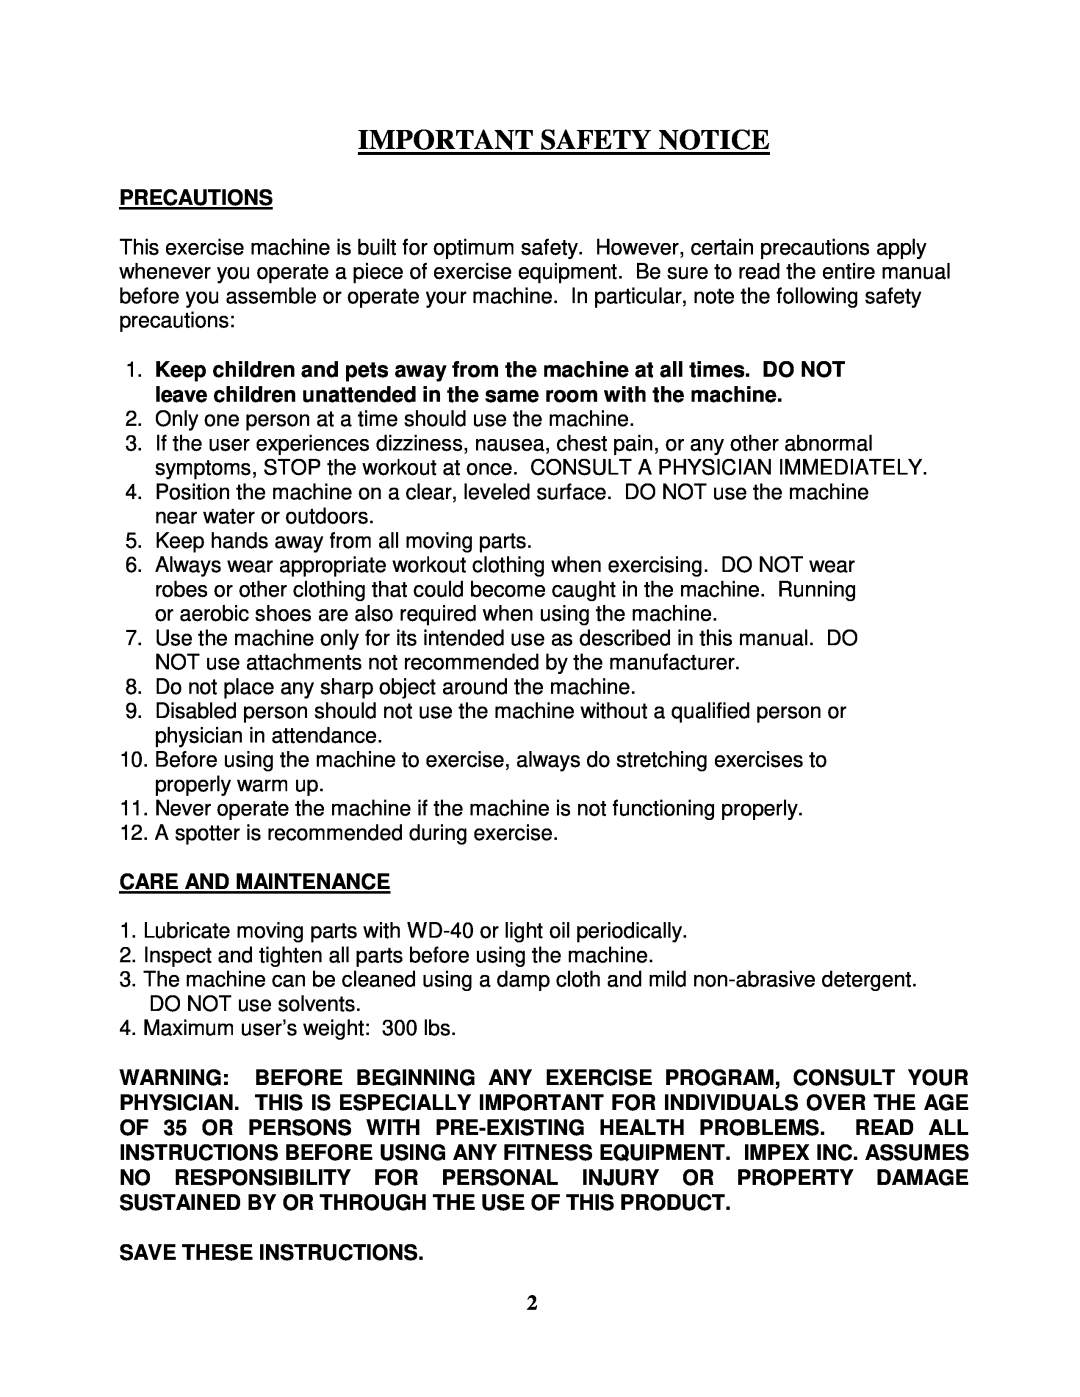 Impex MWM7150 manual Important Safety Notice, Precautions, Care And Maintenance, Save These Instructions 